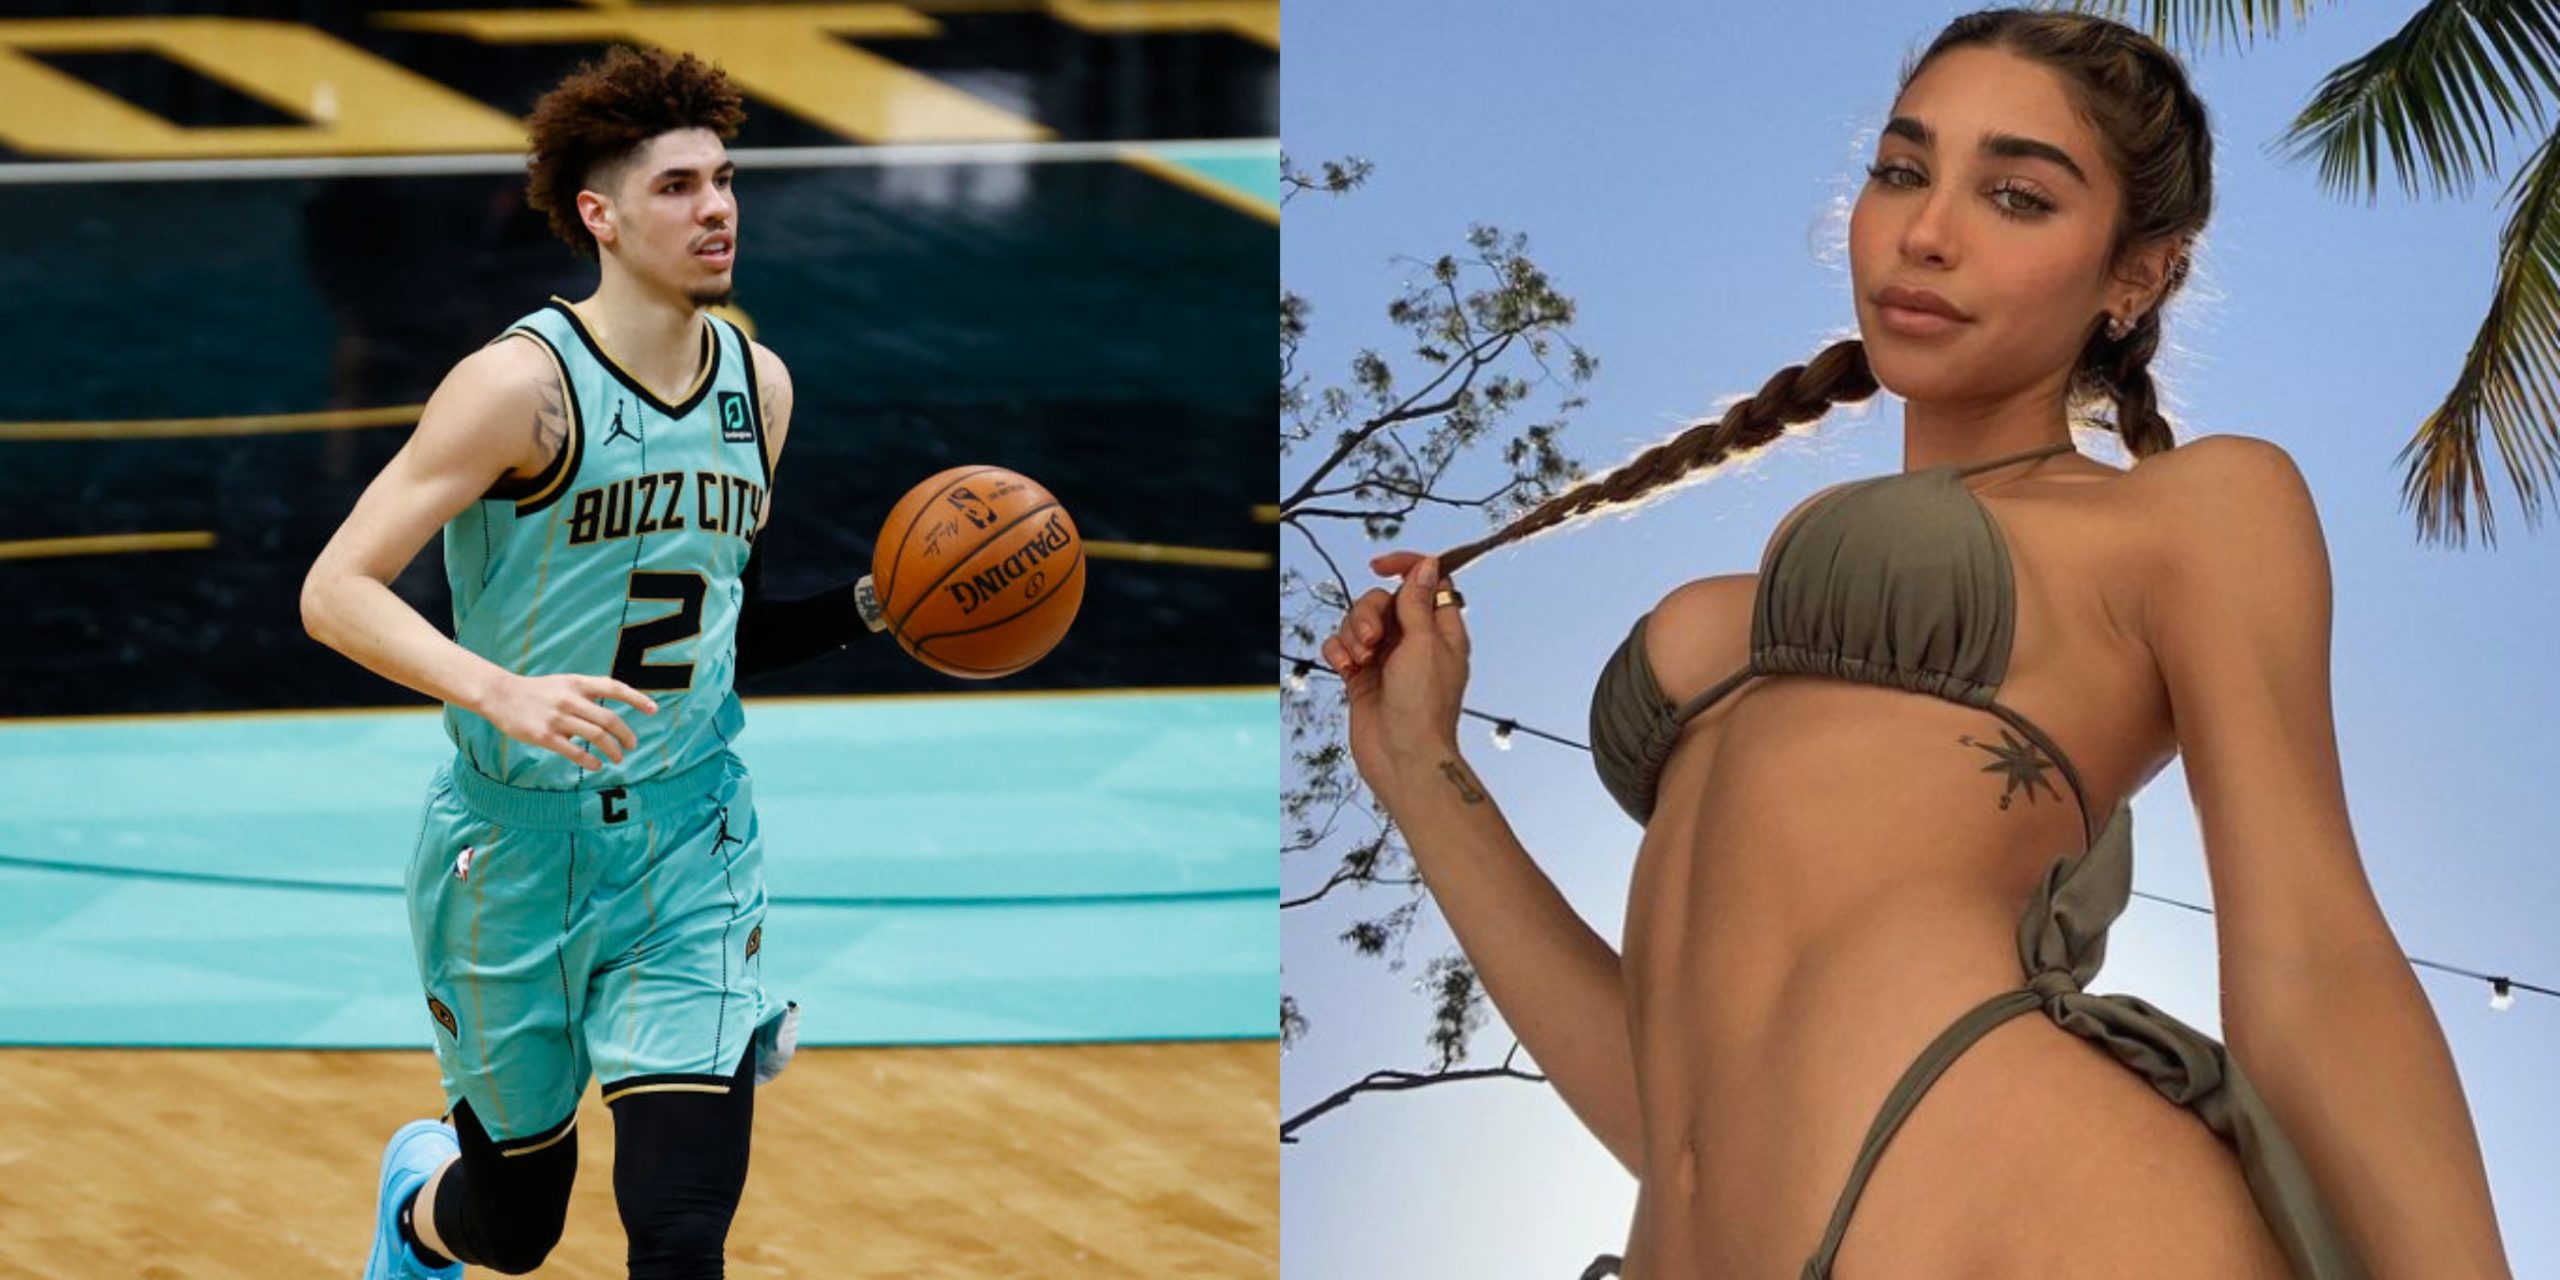 LaMelo Ball Spotted Shooting His Shot At Justin Bieber's Ex-GF Chantel...